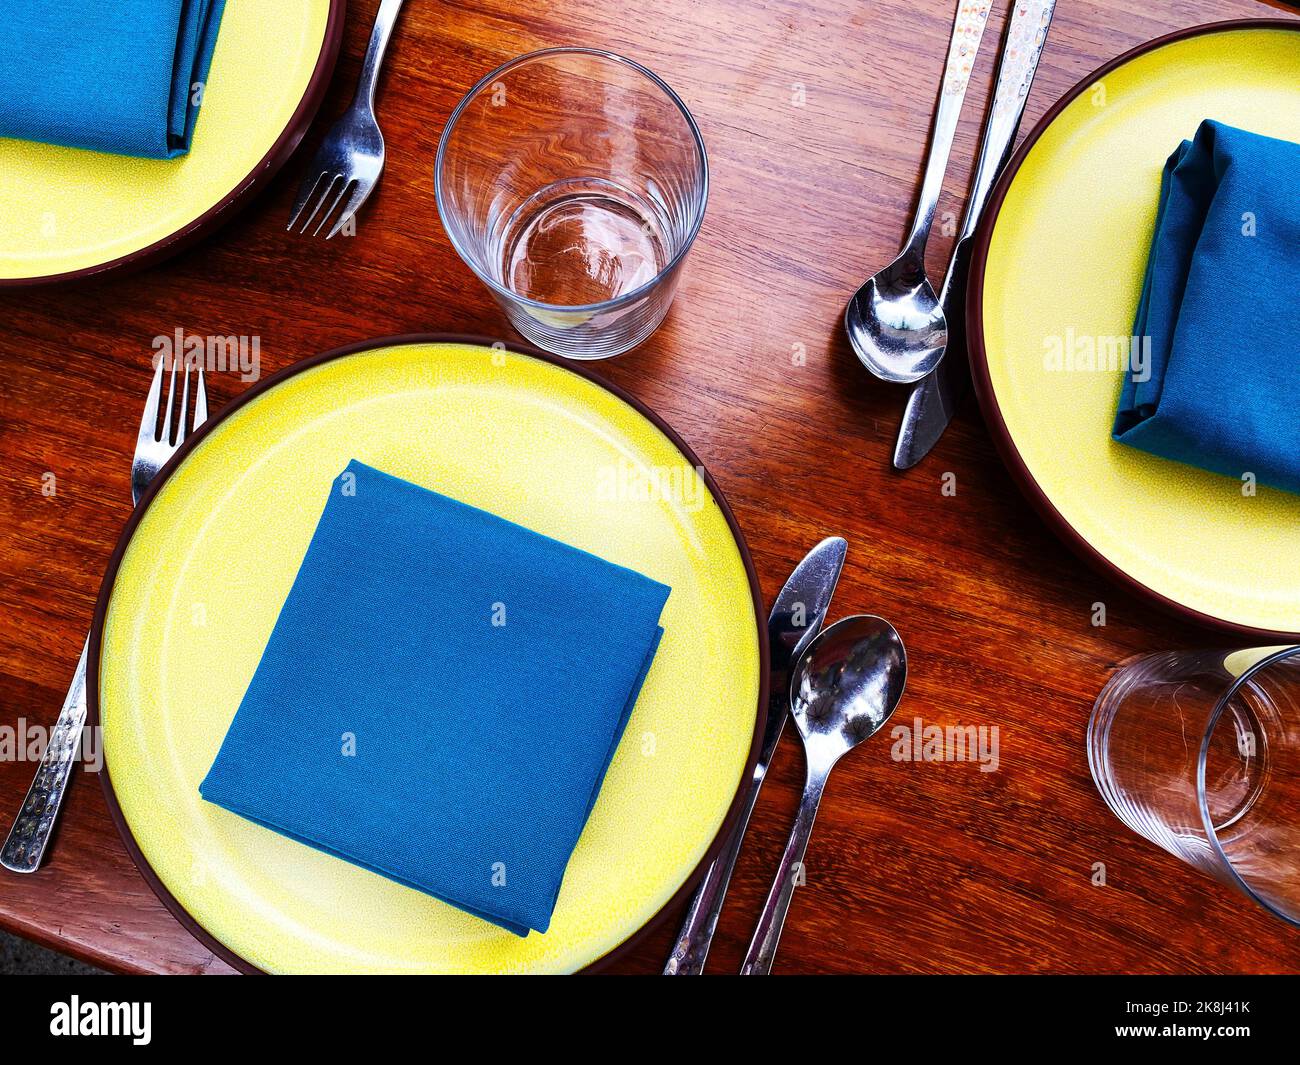 A place setting with blue napkins and yellow plates. Colorful Instagrammable hip restaurant table layout Stock Photo